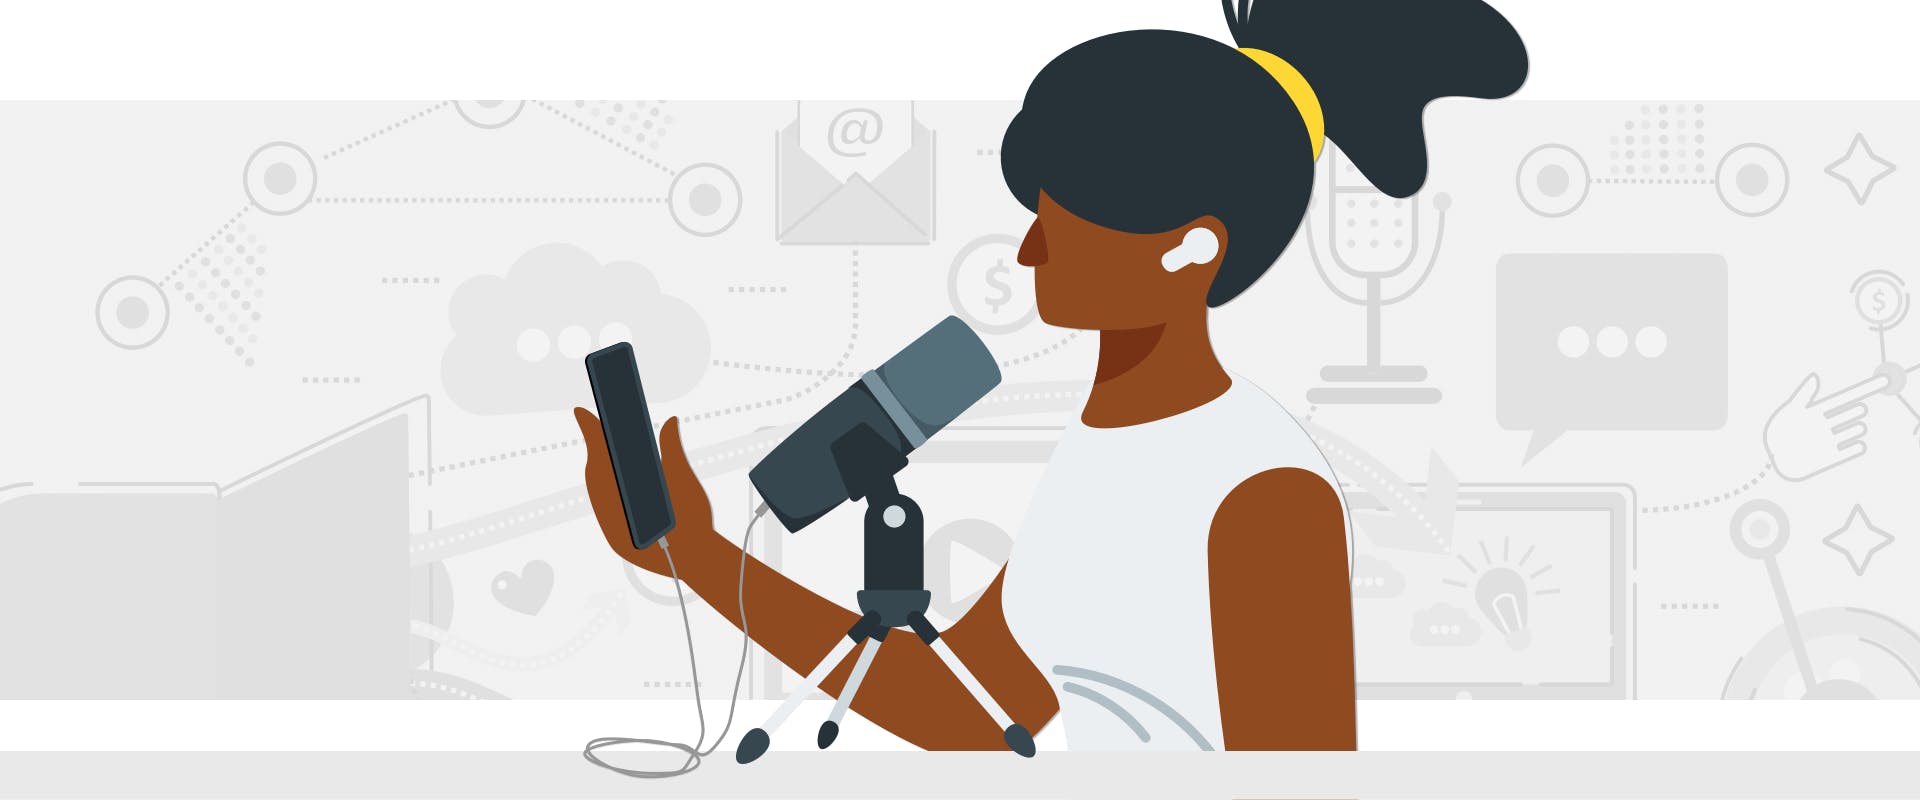 Woman podcaster holding smartphone speaking into microphone